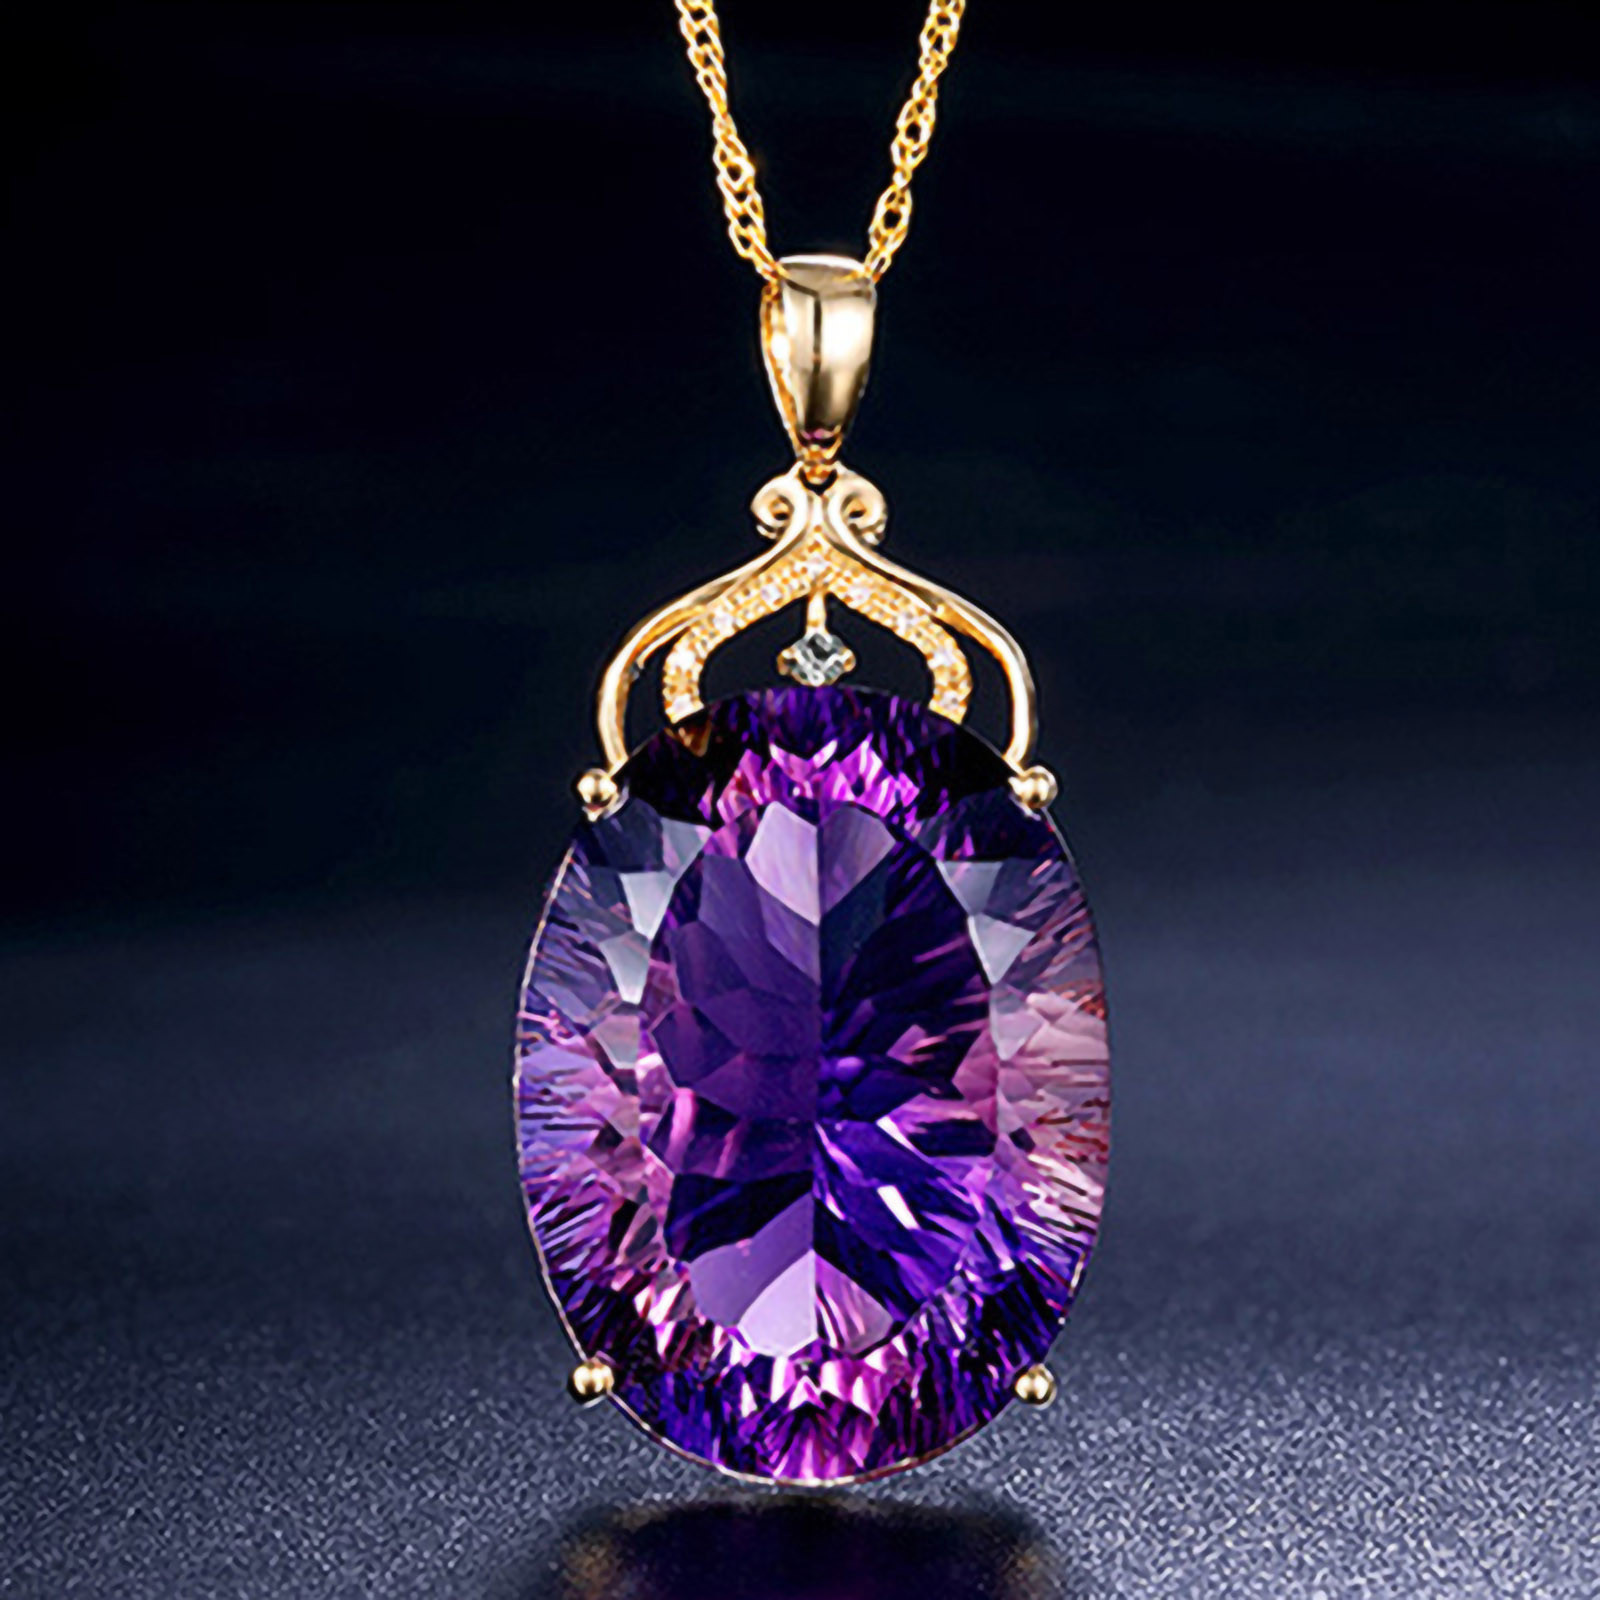 Apmemiss Wholesale European And American Ladies Fashion Luxury Amethyst Pendant Necklace Amethyst Gemstone Necklace Jewelry - image 4 of 8